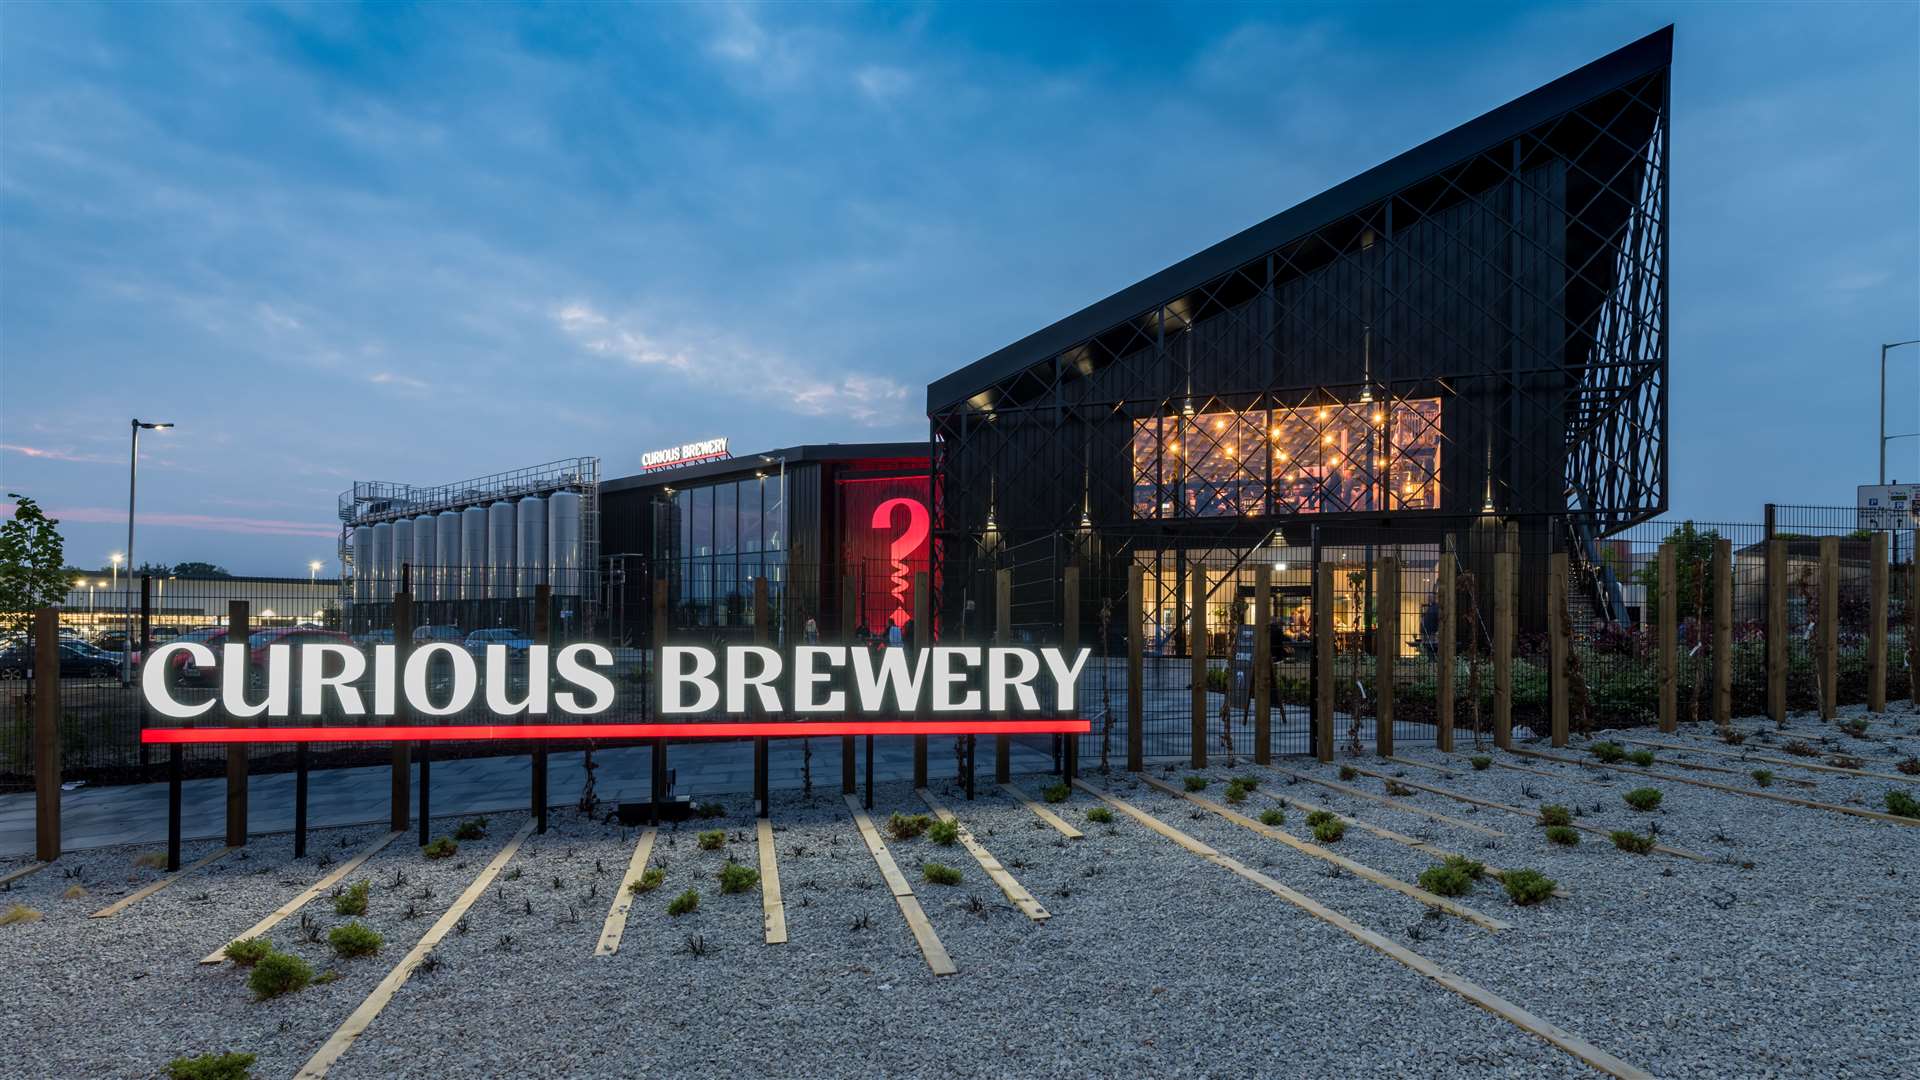 Curious Brewery in Ashford have also offered roles